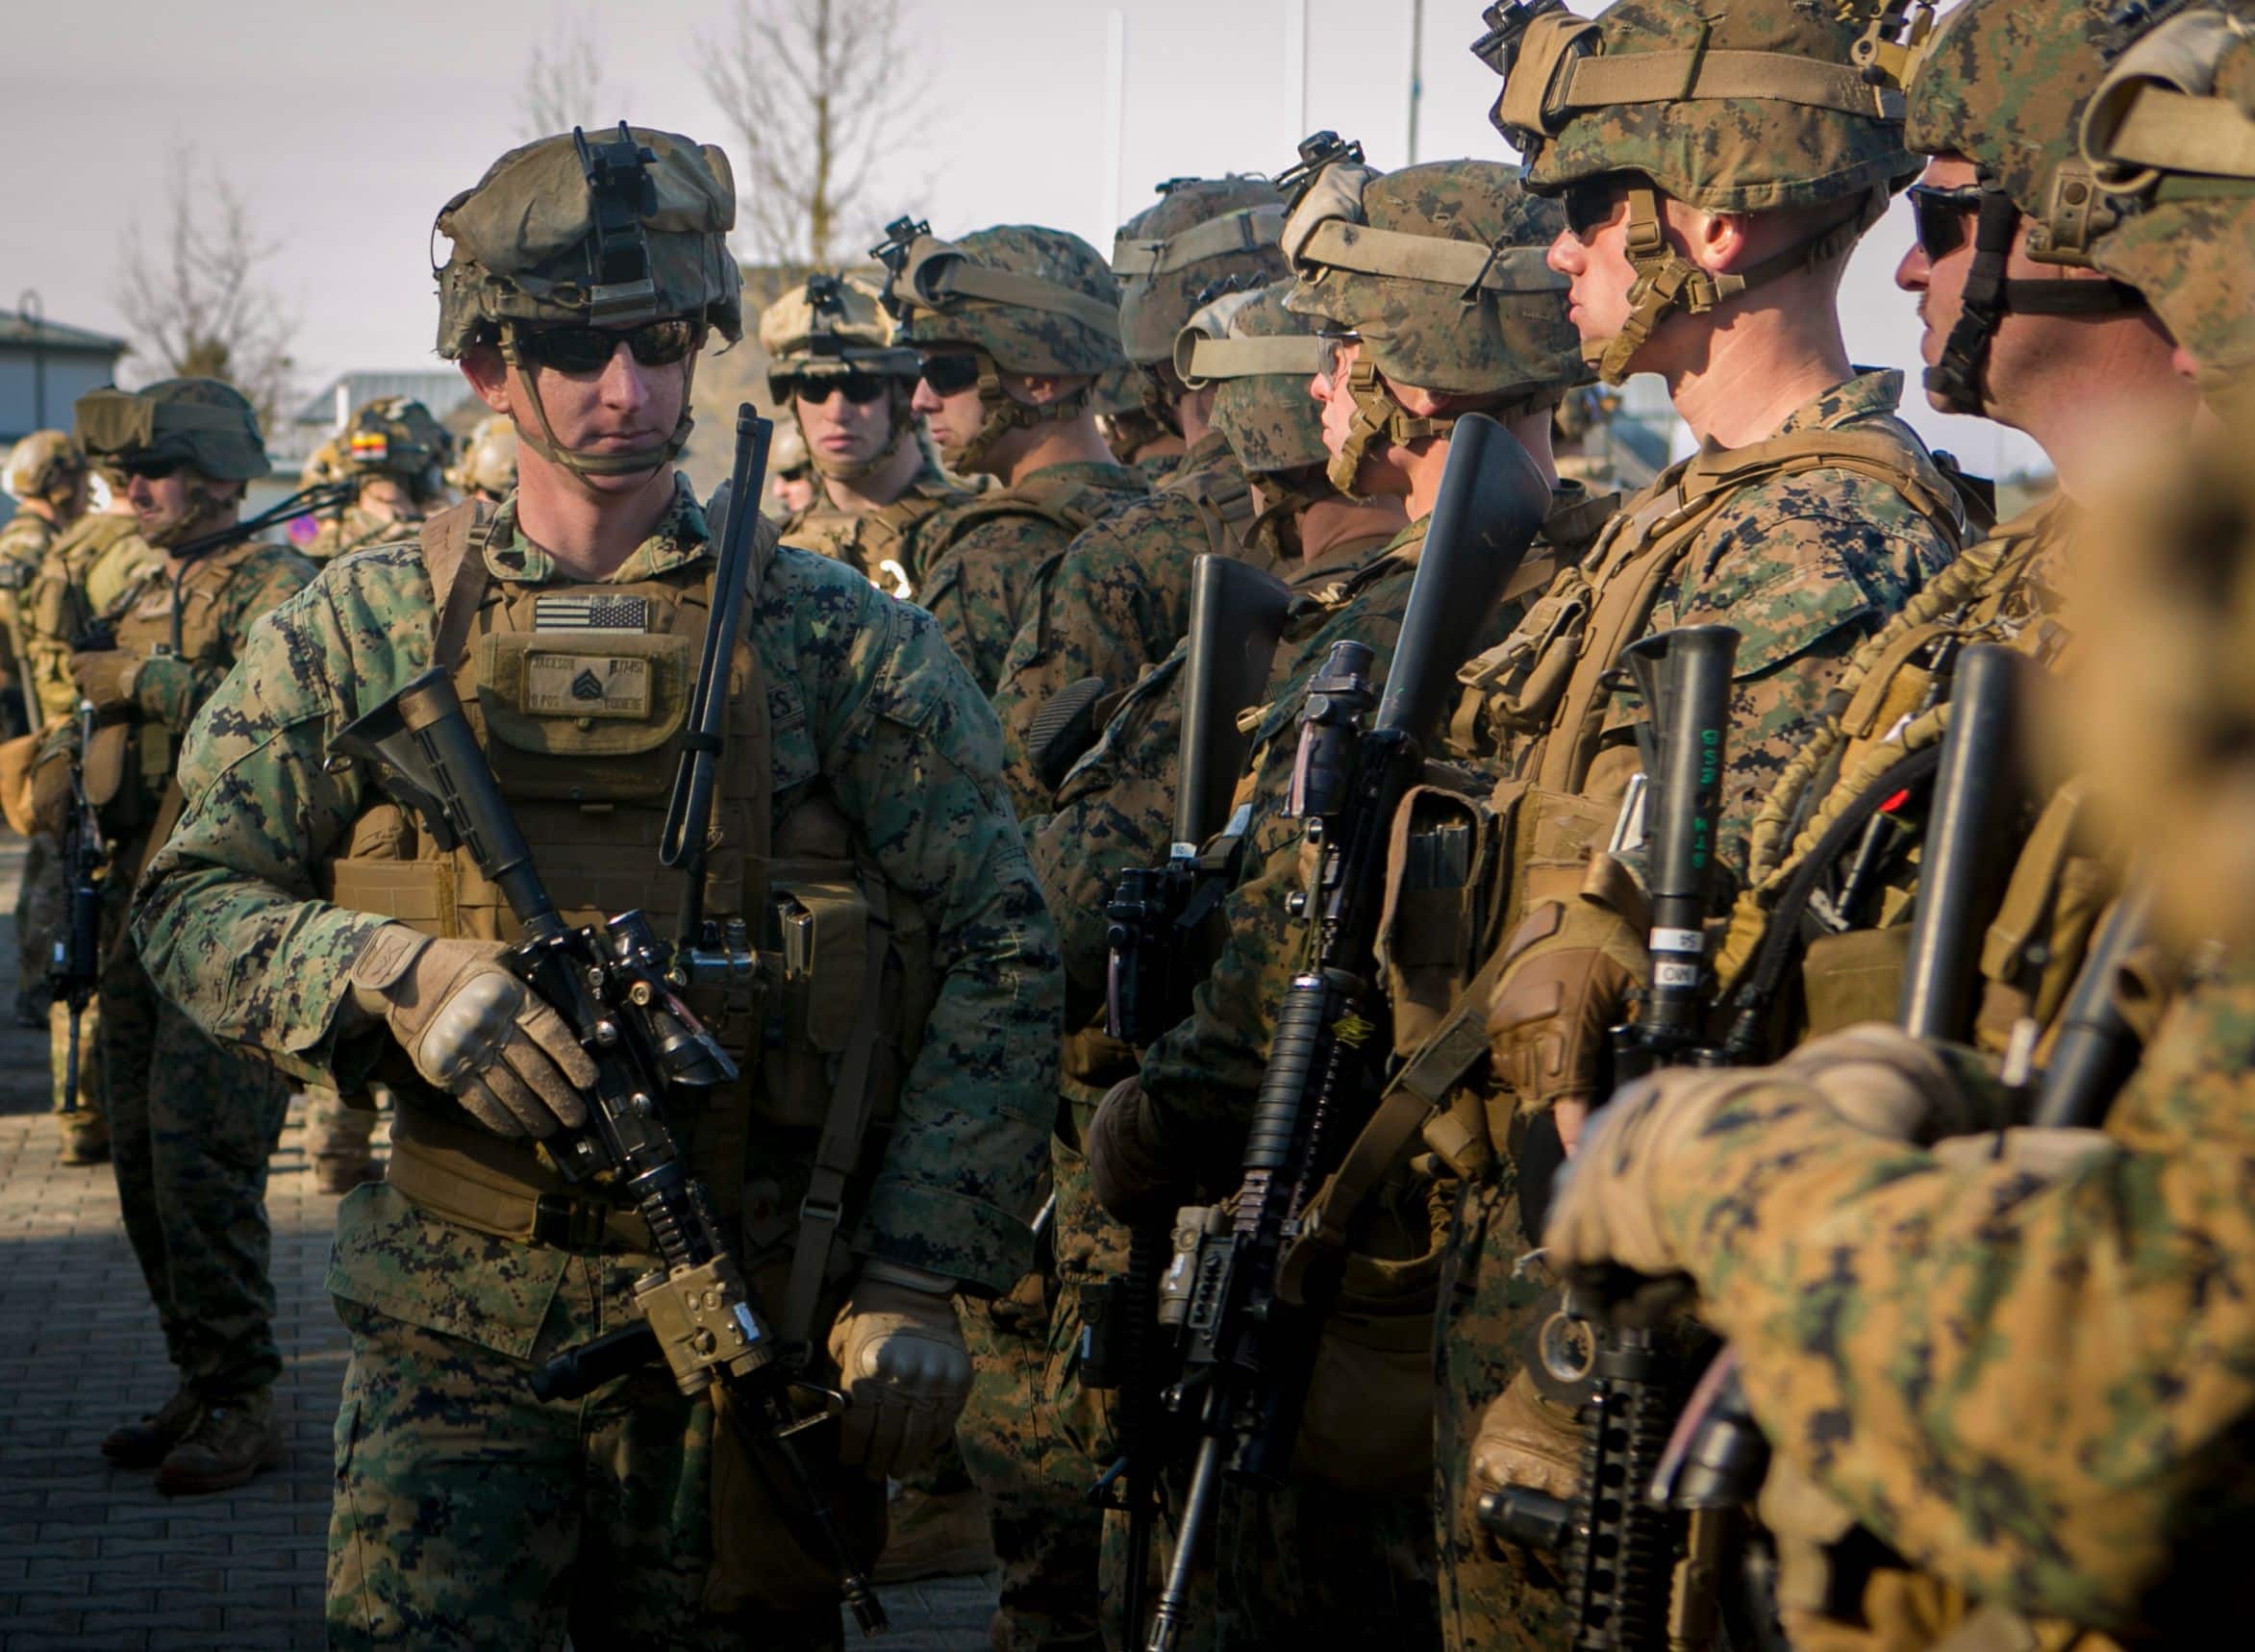 U.S. Marine Sgt. Garrett Jackson, a squad leader with Special-Purpose Marine Air-Ground Task Force Crisis Response-Africa, checks his team before setting out on a mock assault with U.S. Army Special Forces in Baumholder, Germany, March 11, 2015. Jackson led his squad through more than a week of training with Special Forces personnel to prepare the two groups to conduct future operations together. (U.S. Marine Corps photo by Sgt. Paul Peterson/Released)